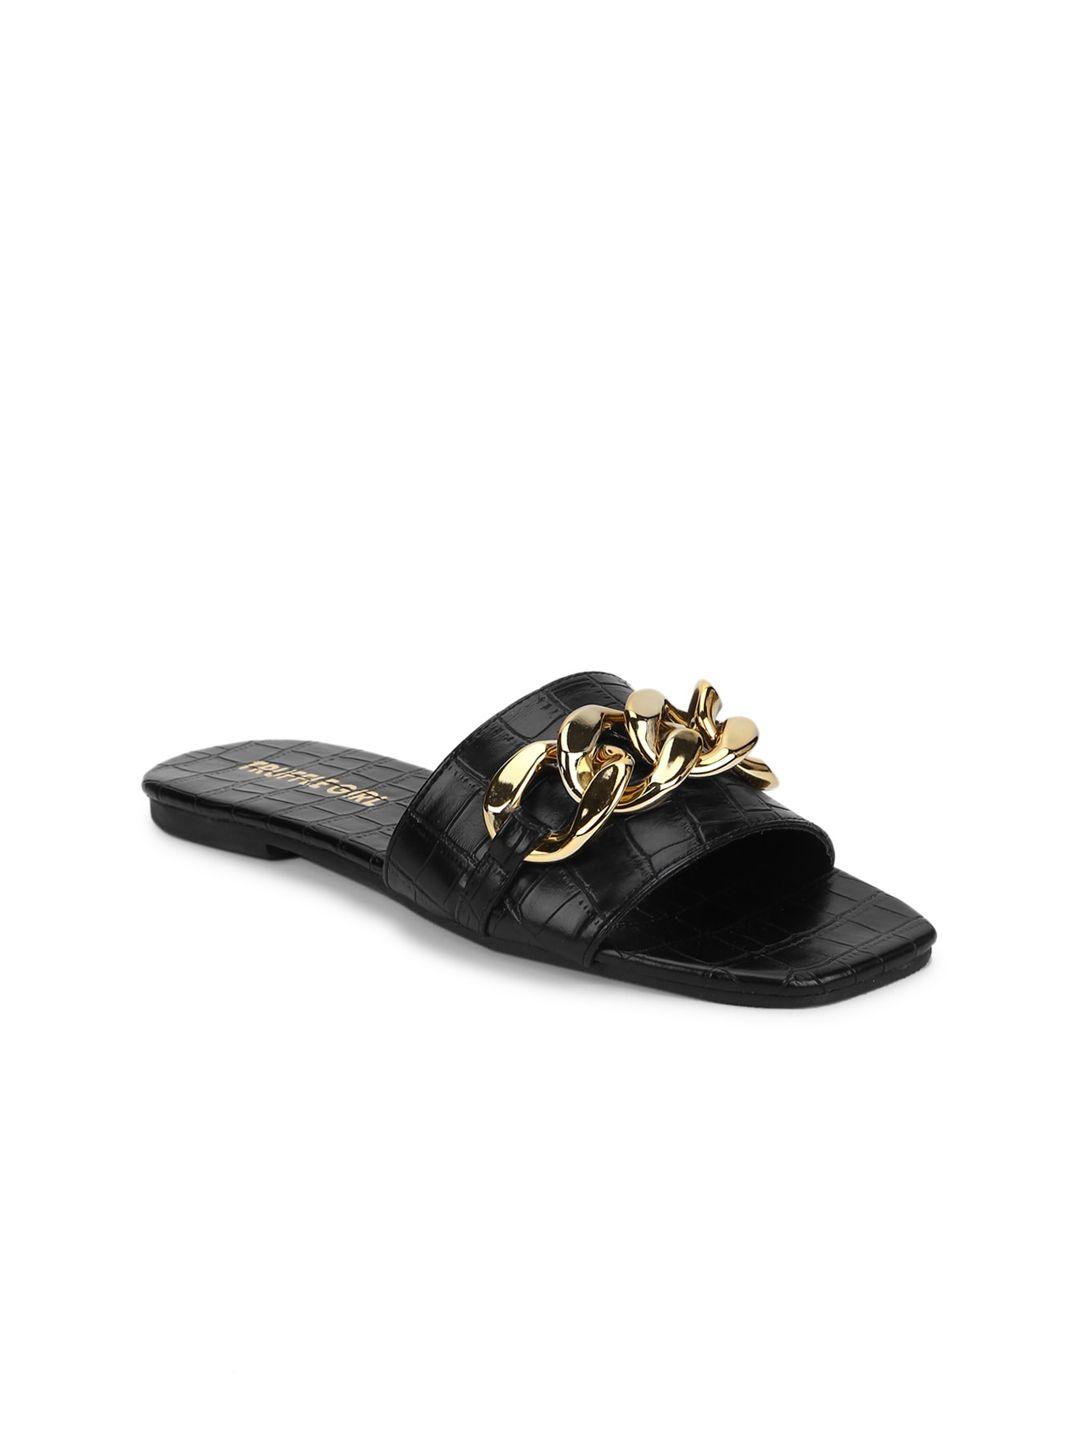 truffle collection women black & gold-toned embellished open toe flats